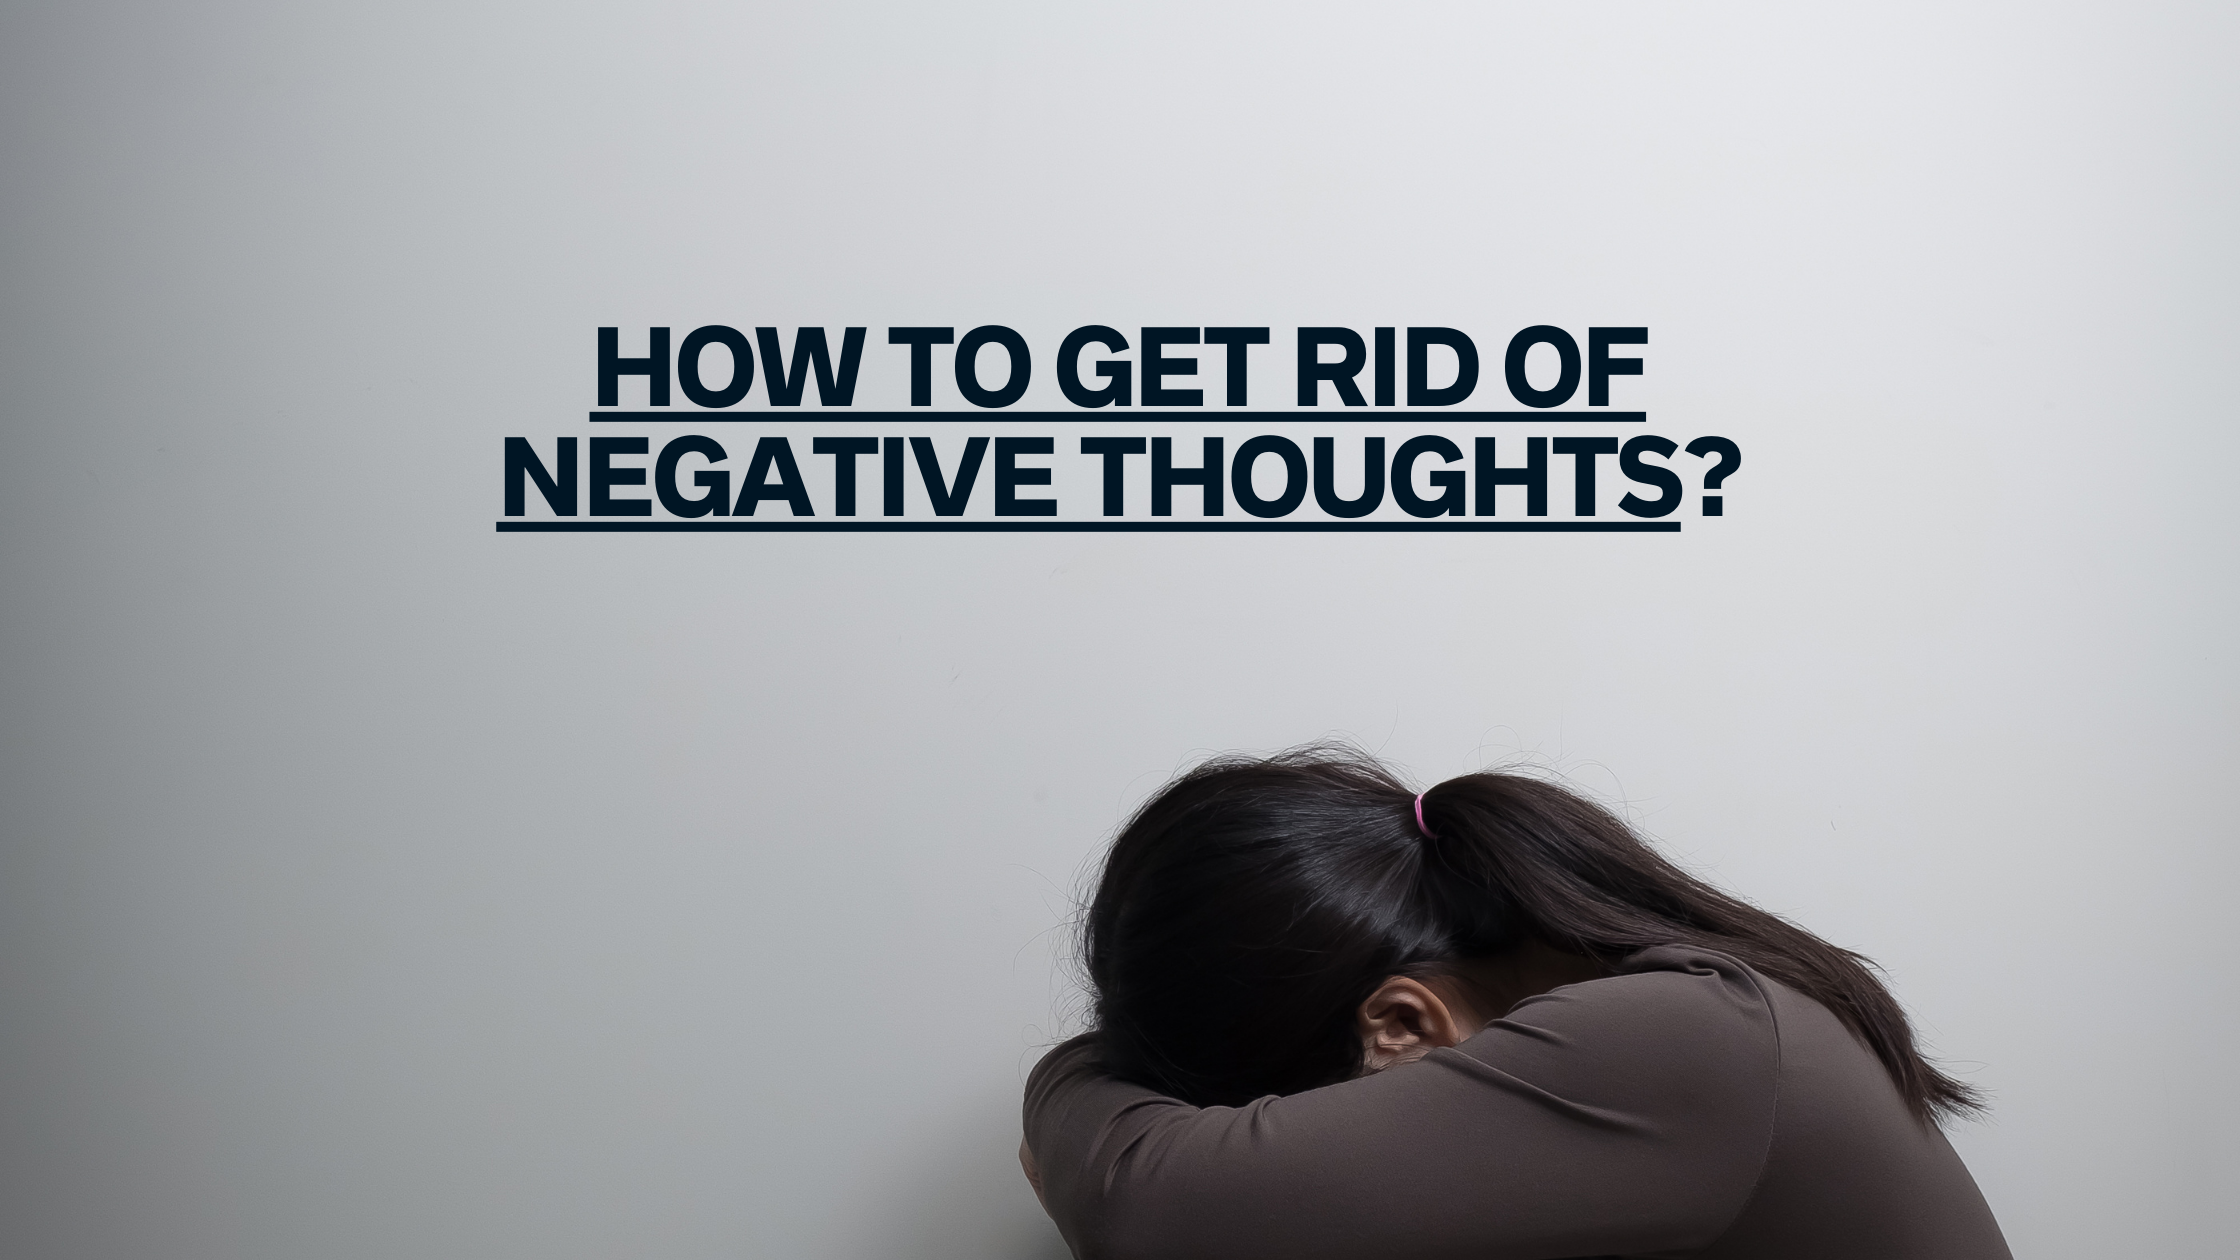 How to Get Rid of Negative Thoughts